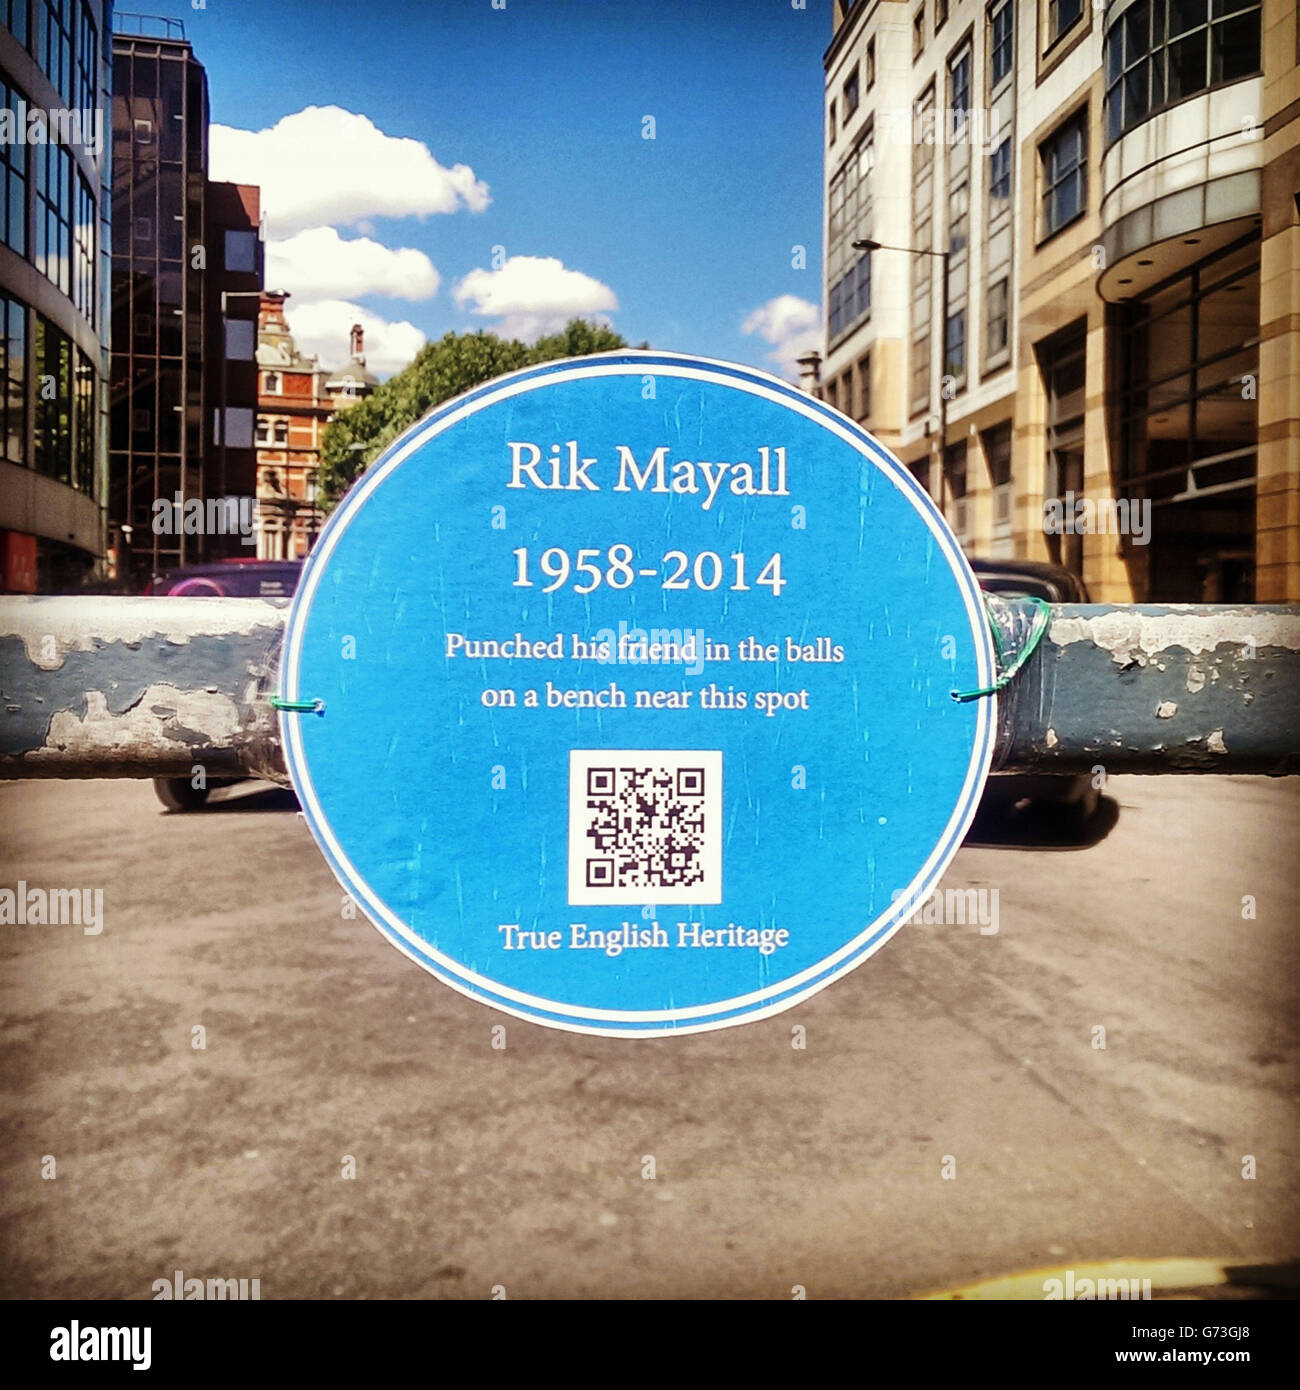 A temporary English Heritage style blue plaque in Hammersmith, west London, dedicated to the comic actor Rik Mayall who died yesteday, the QR code on the plaque links to a Youtube clip showing the opening scene of the comedy series 'Bottom' that was filmed in Hammersmith. Stock Photo